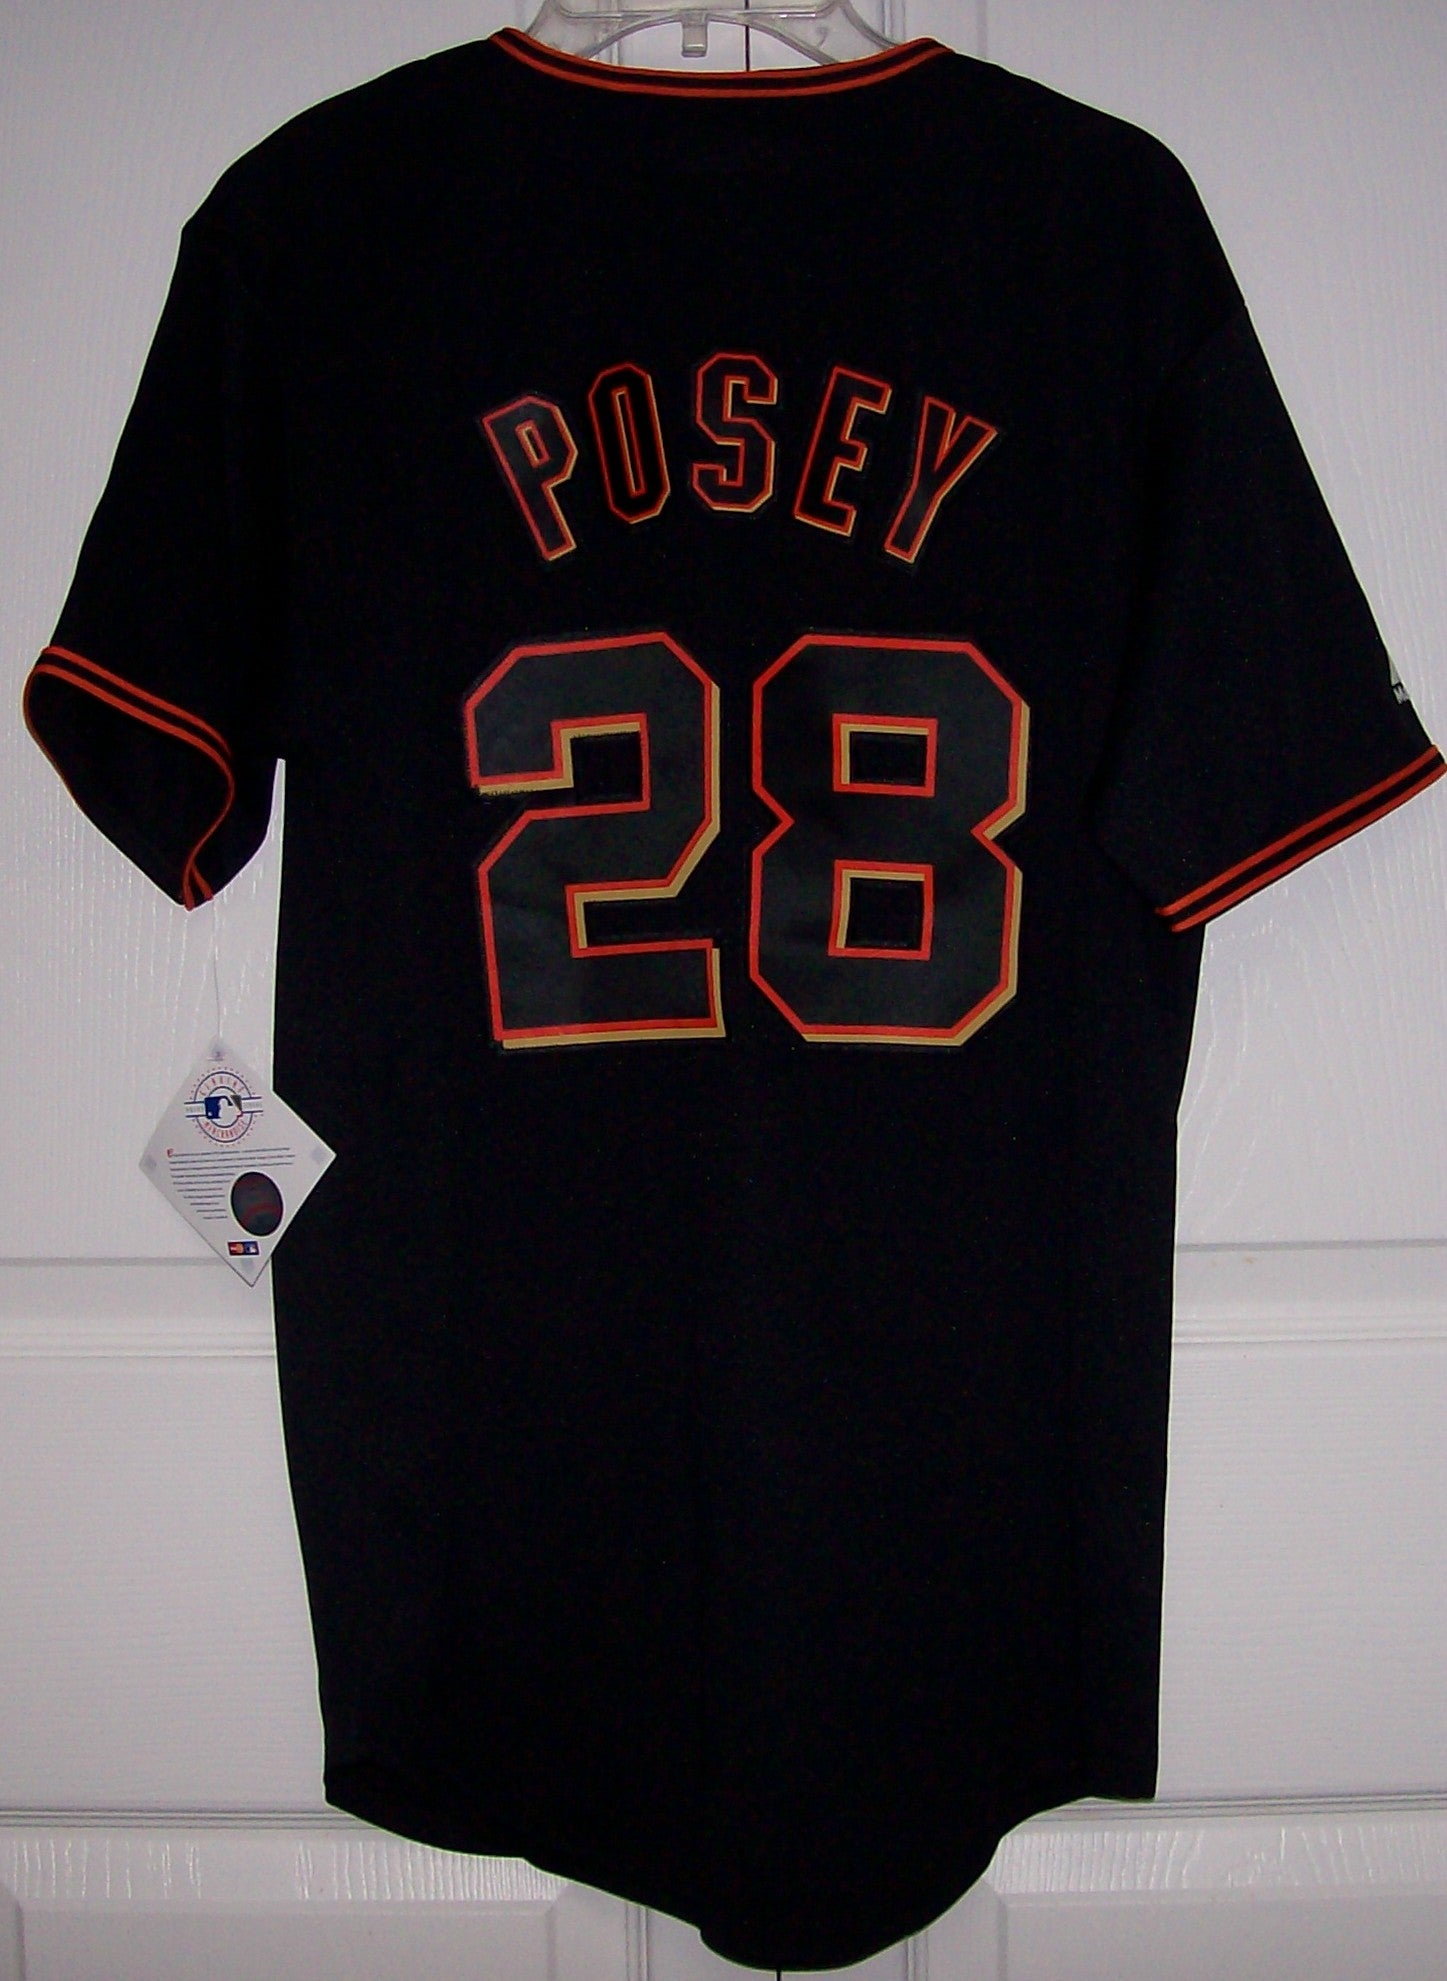 sf giants jersey no name